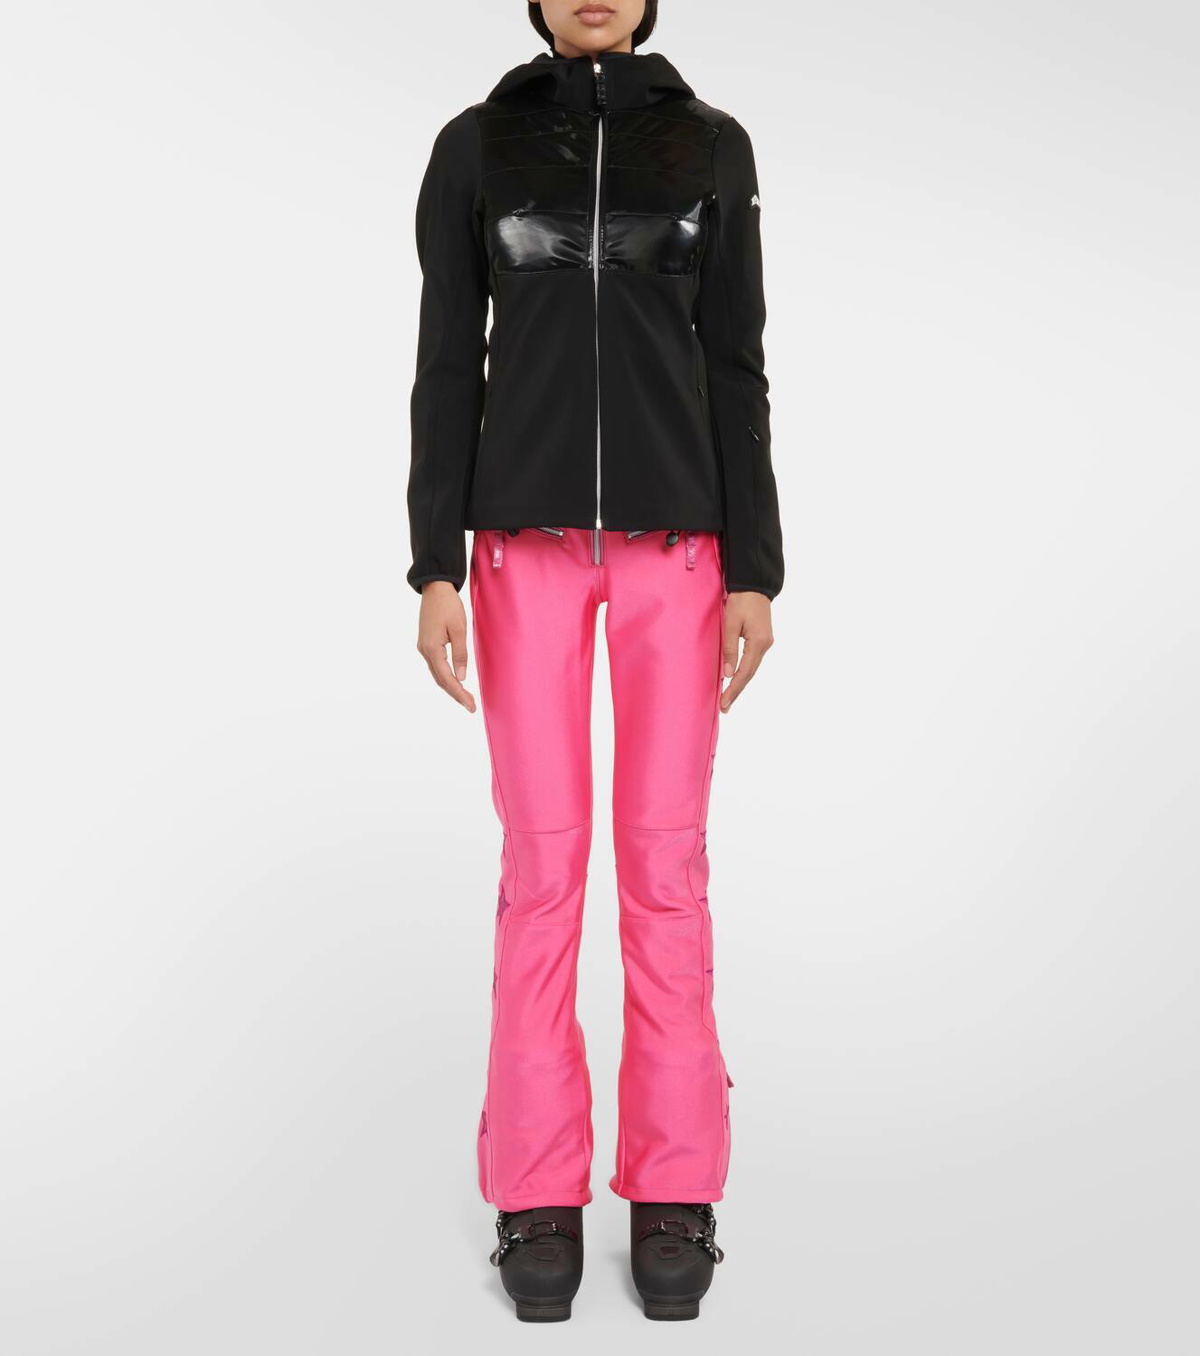 JETSET Tiby belted embroidered ski pants